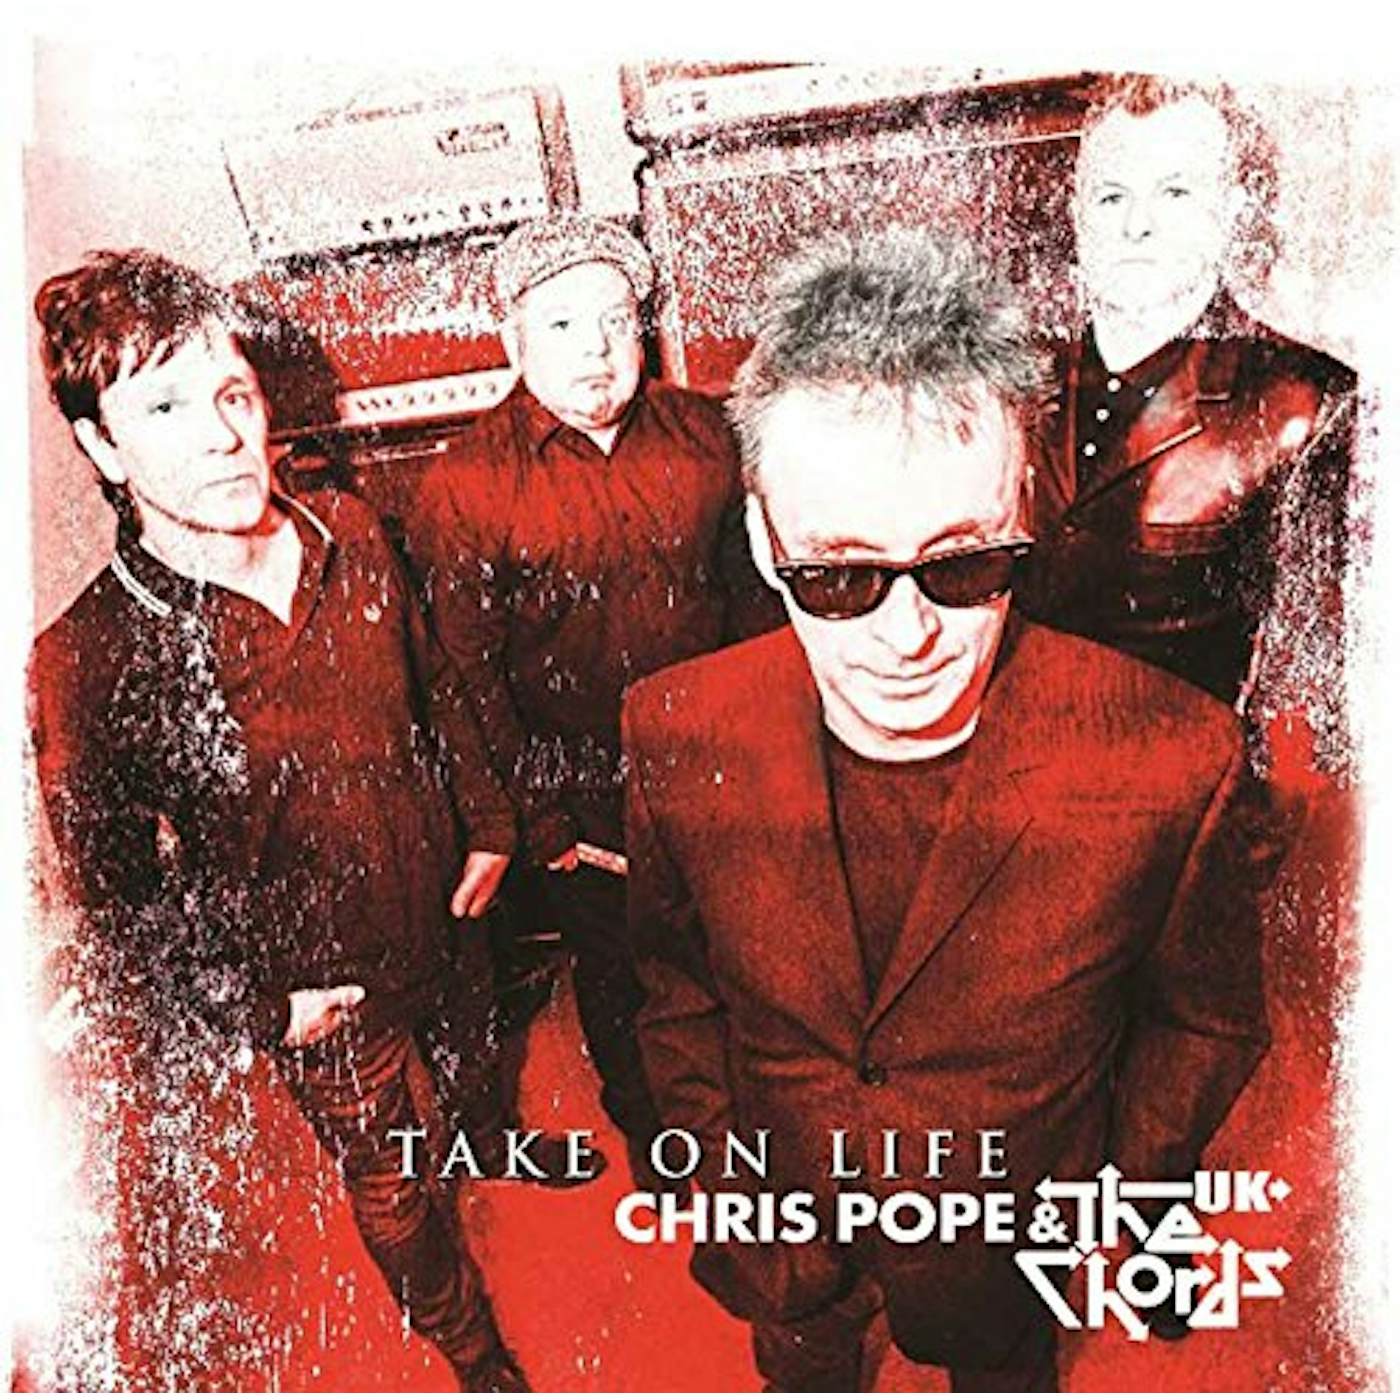 Chris Pope & The Chords TAKE ON LIFE CD